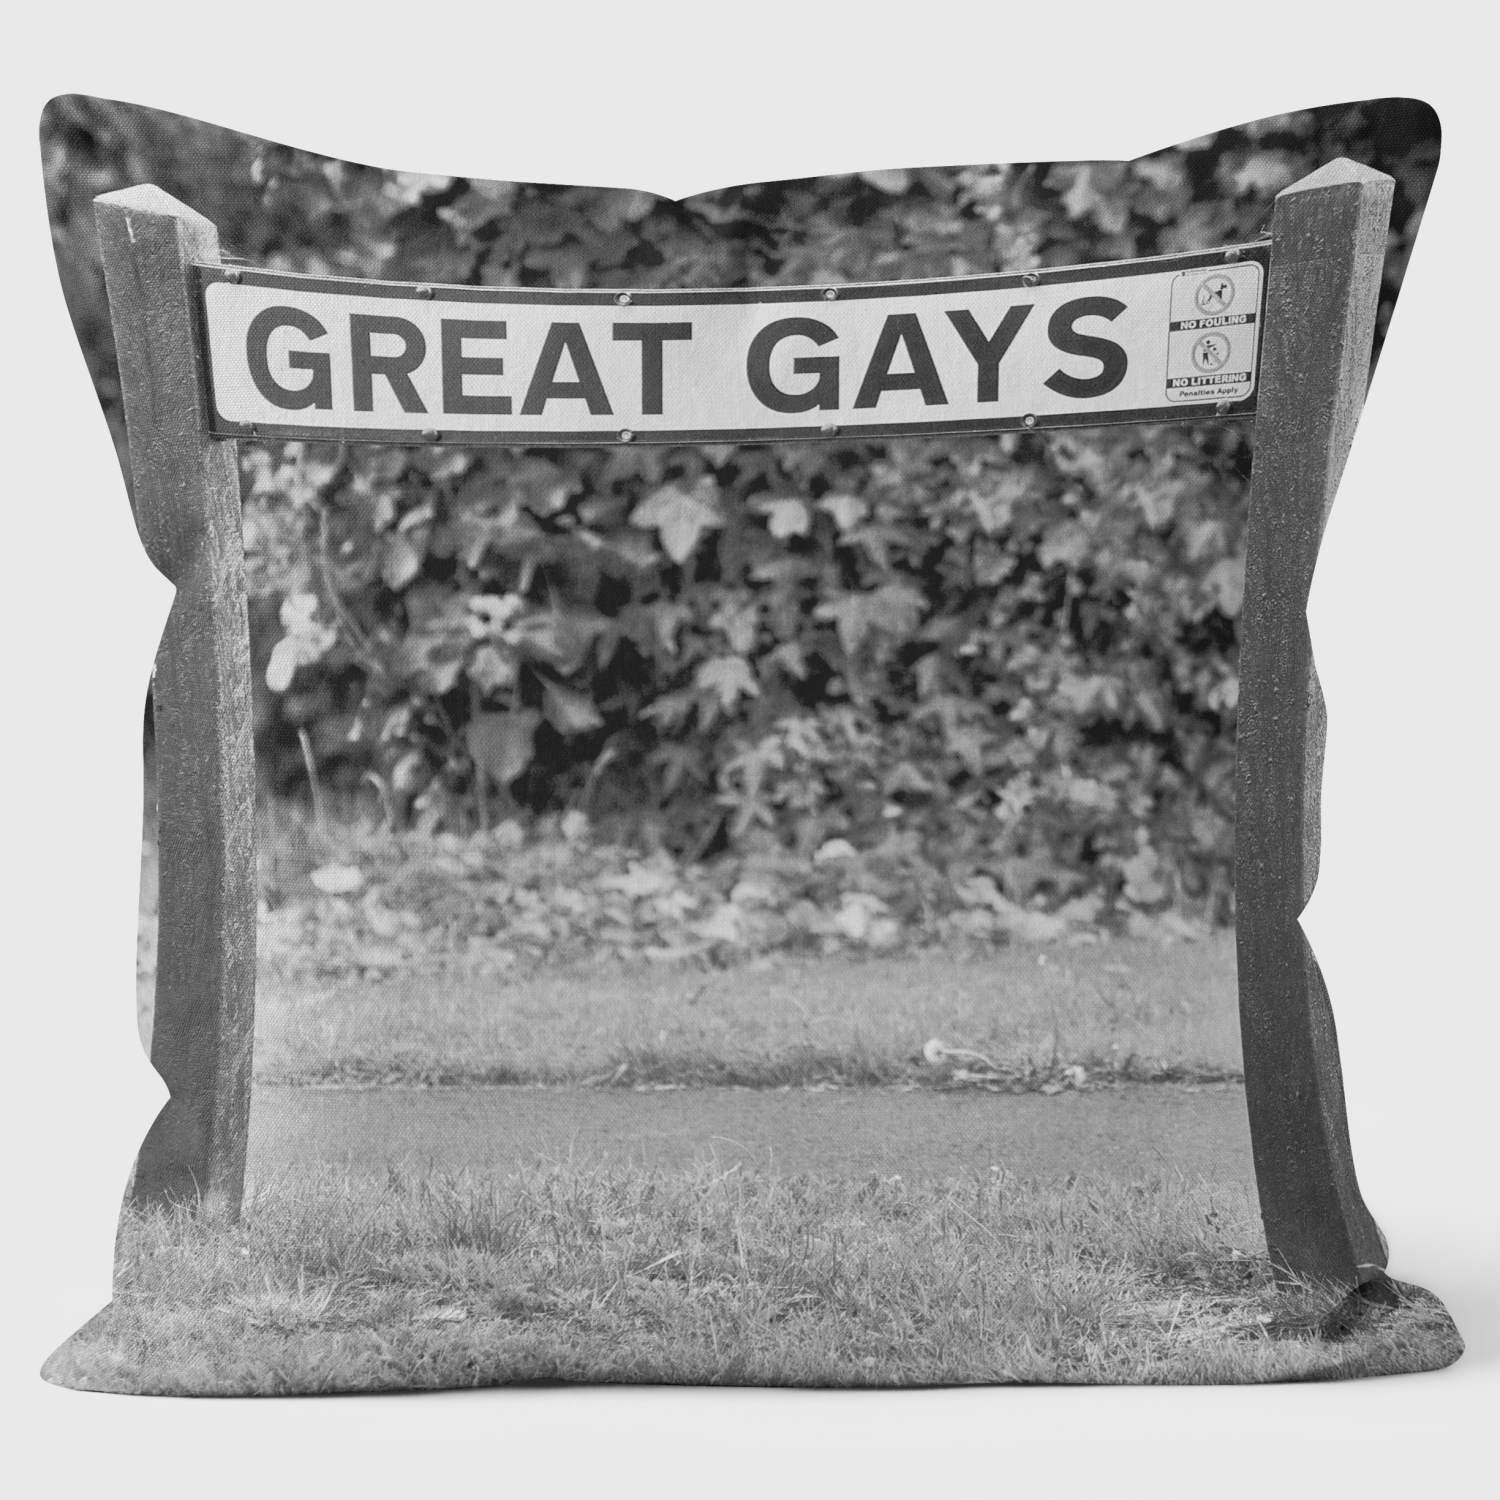 Great Gays - Lesser Spotted Britain Cushion - Handmade Cushions UK - WeLoveCushions